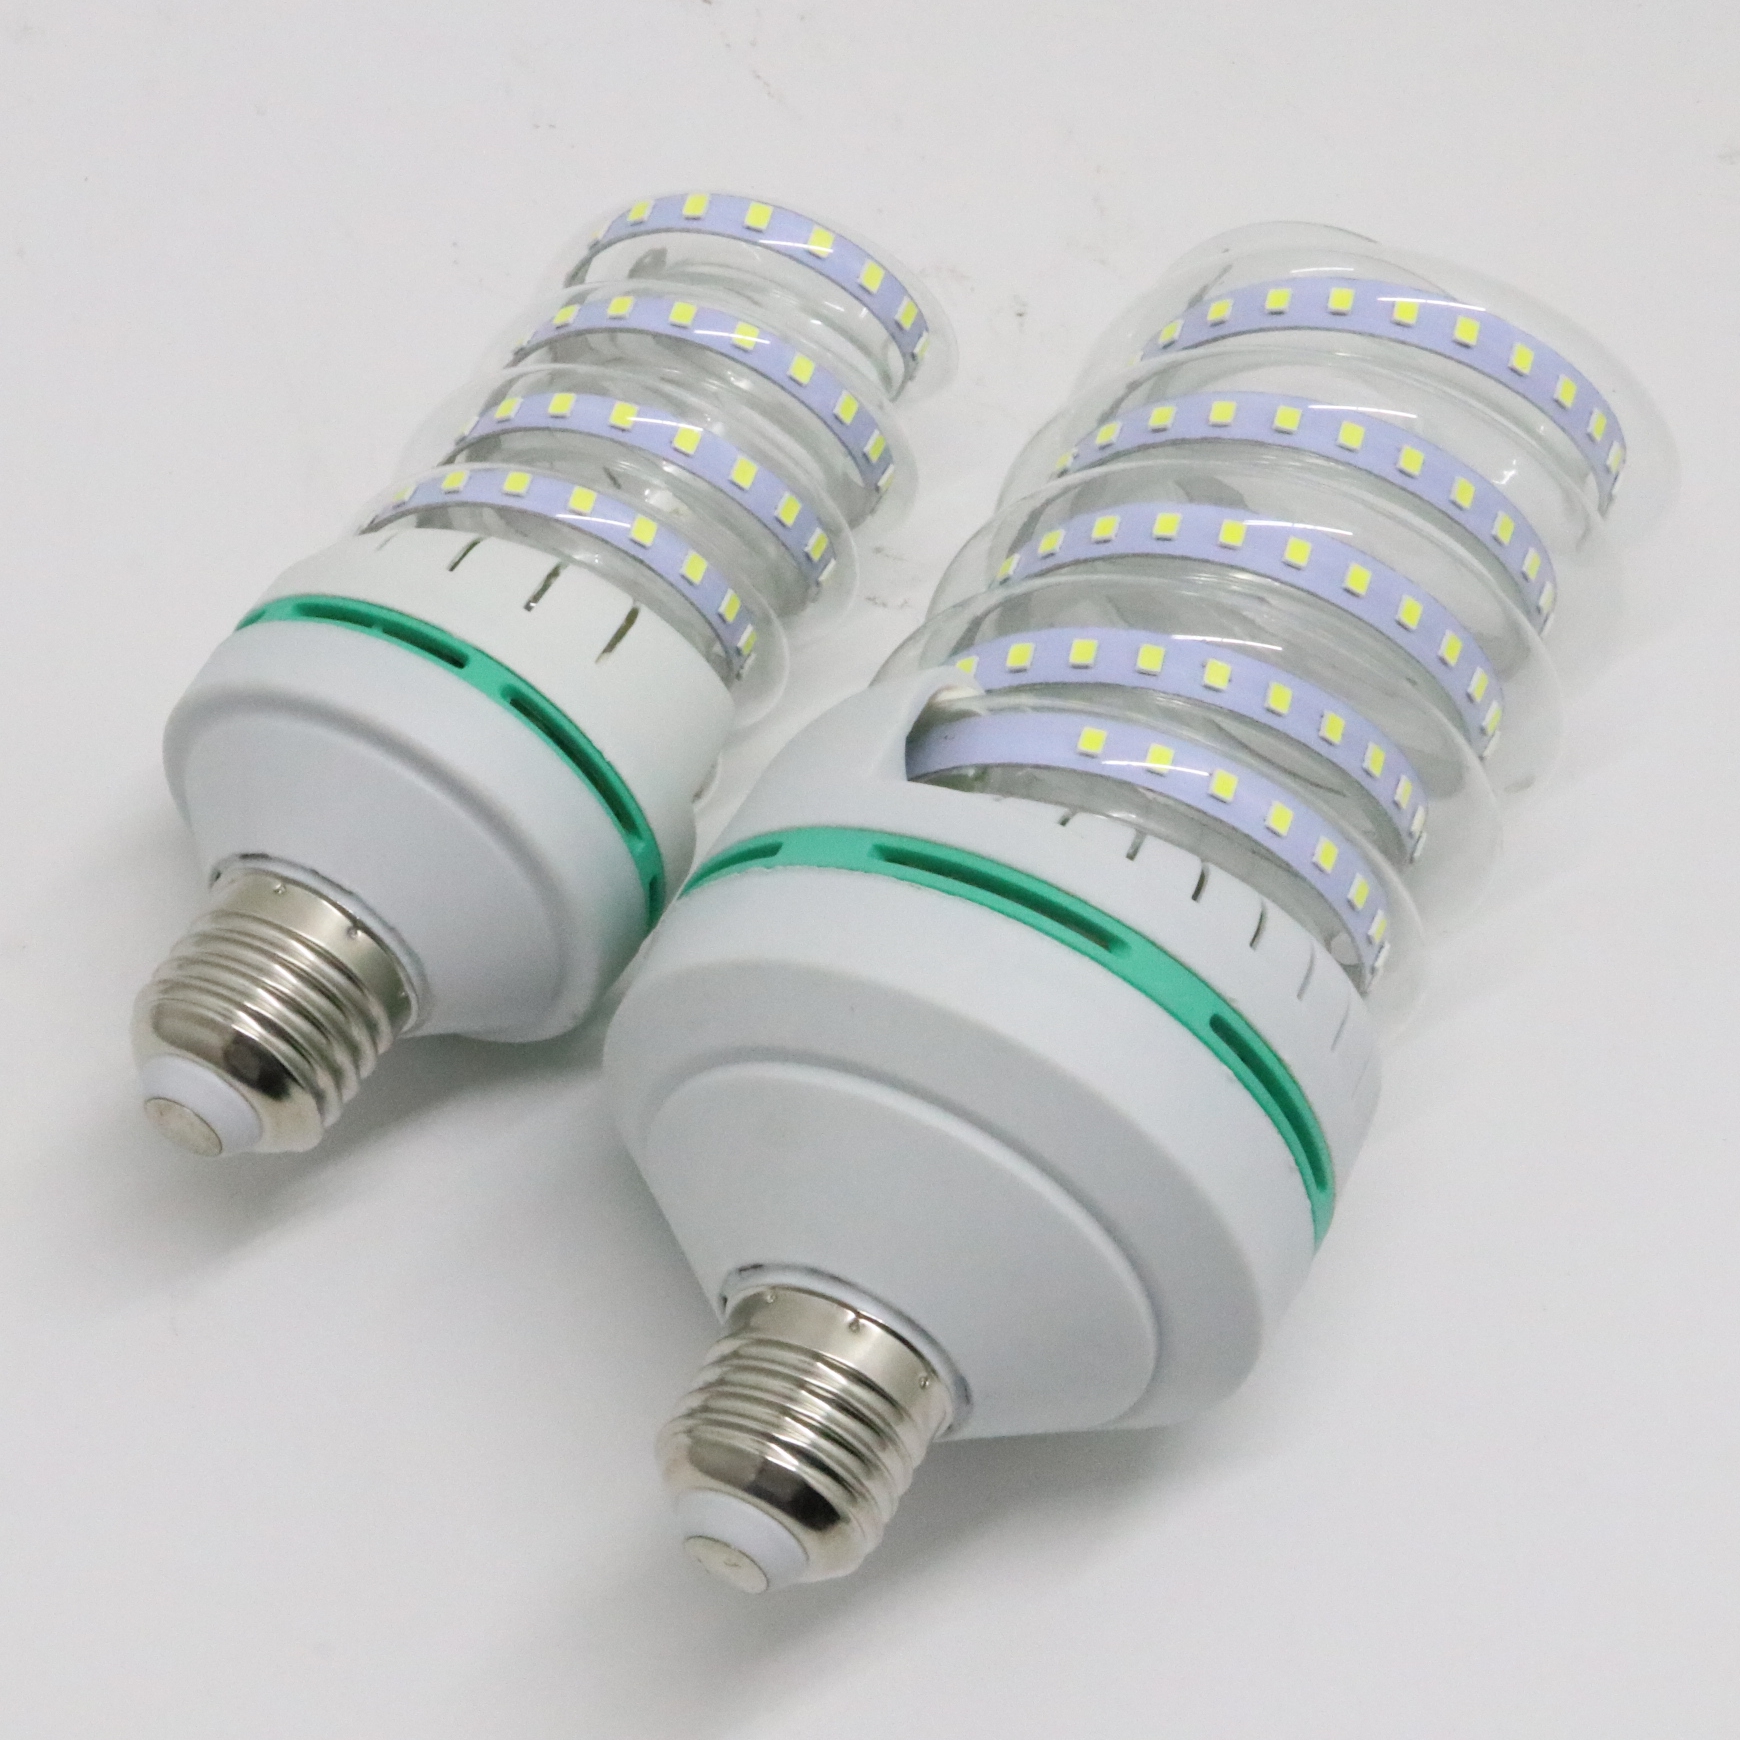 Spiral energy savers fluorescent lamp 45W 105W 65W T8 T6 T4 energy saving light bulb SKD parts with 6000 - 10000 Hours